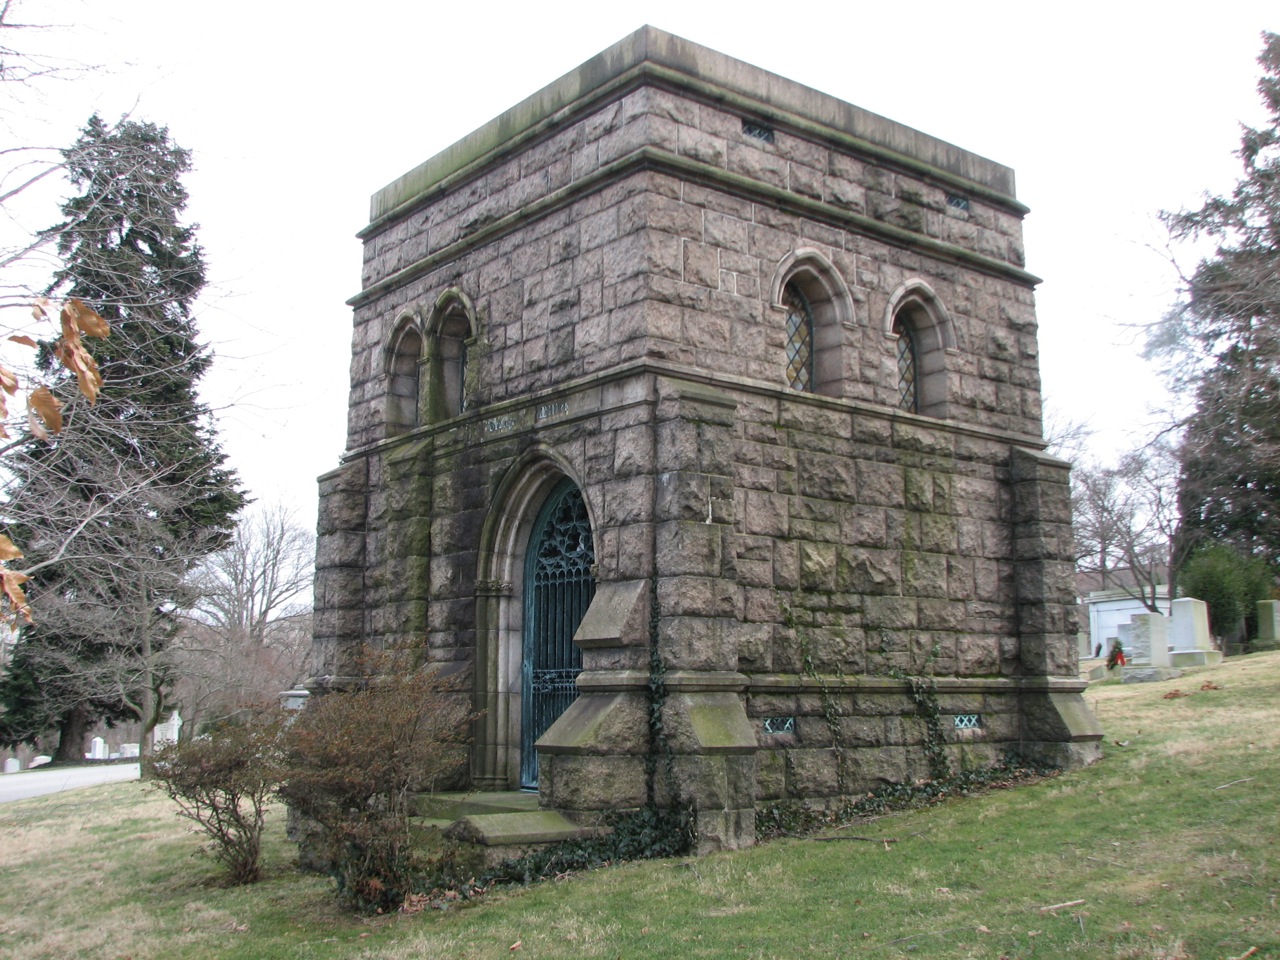 A tomb of rough-hewn stone resembles a Gothic castle.